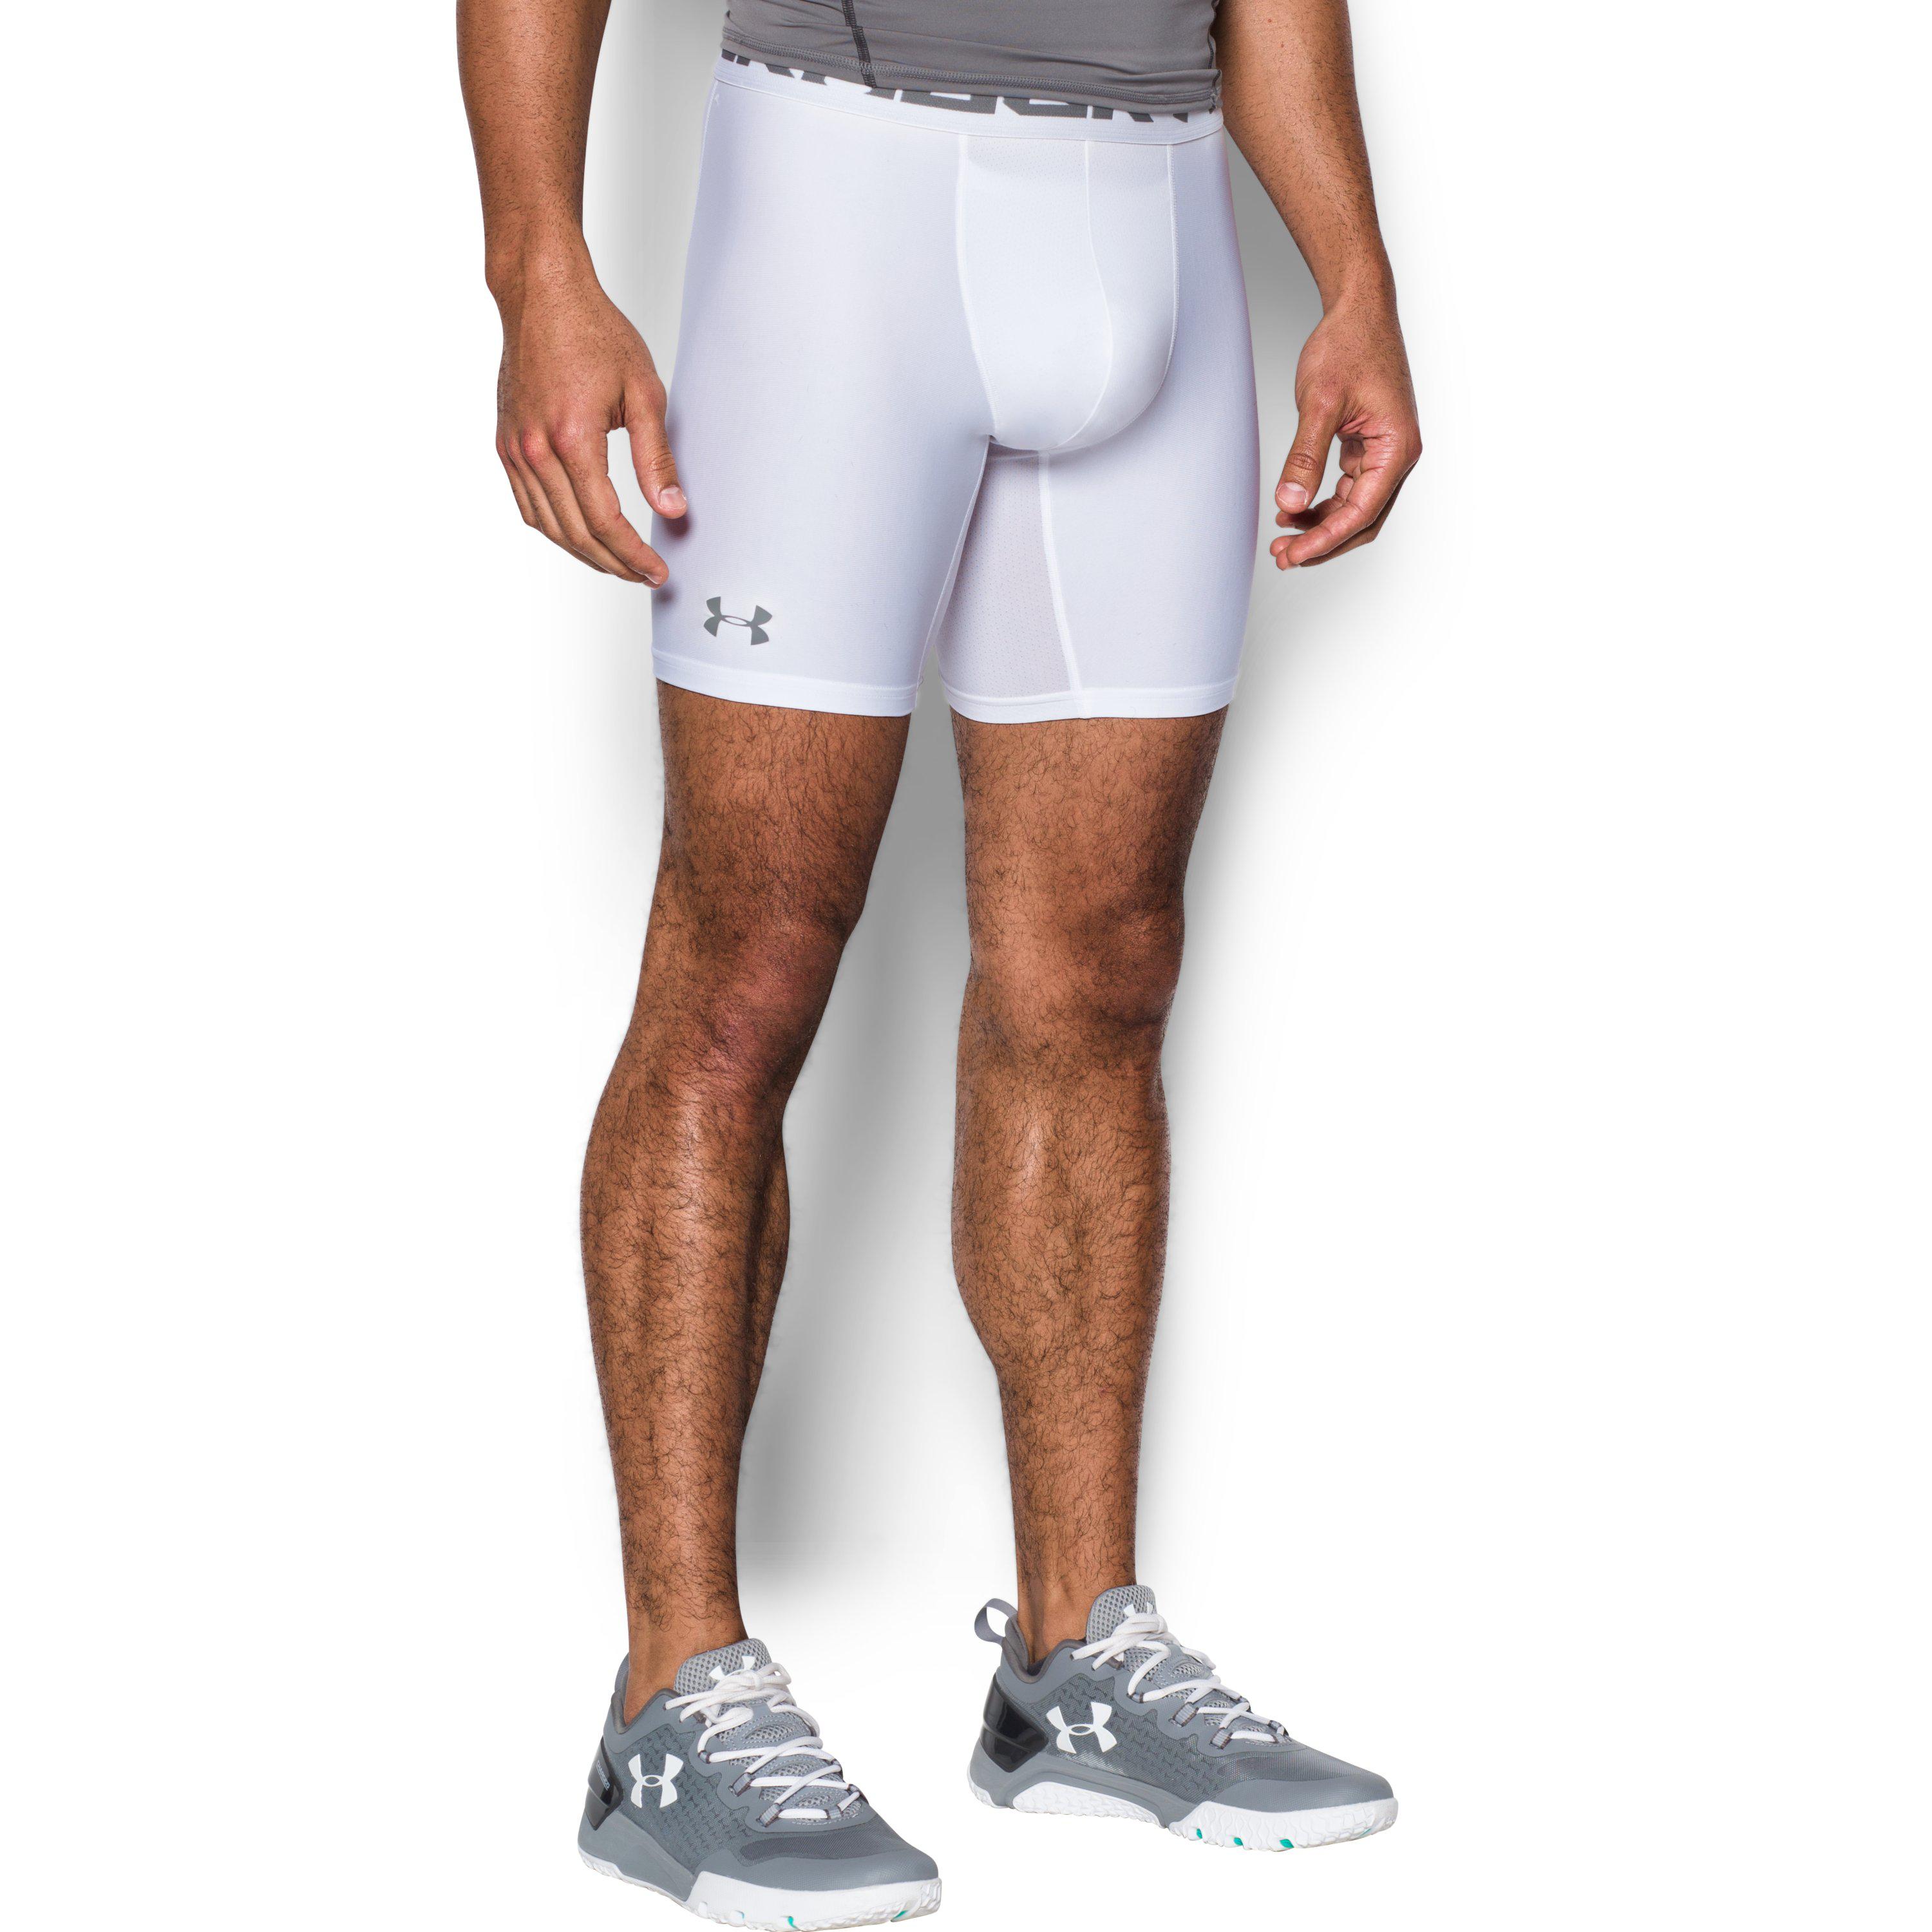 Under Armour Men's Heatgear® Armour Compression Shorts W/ Cup in